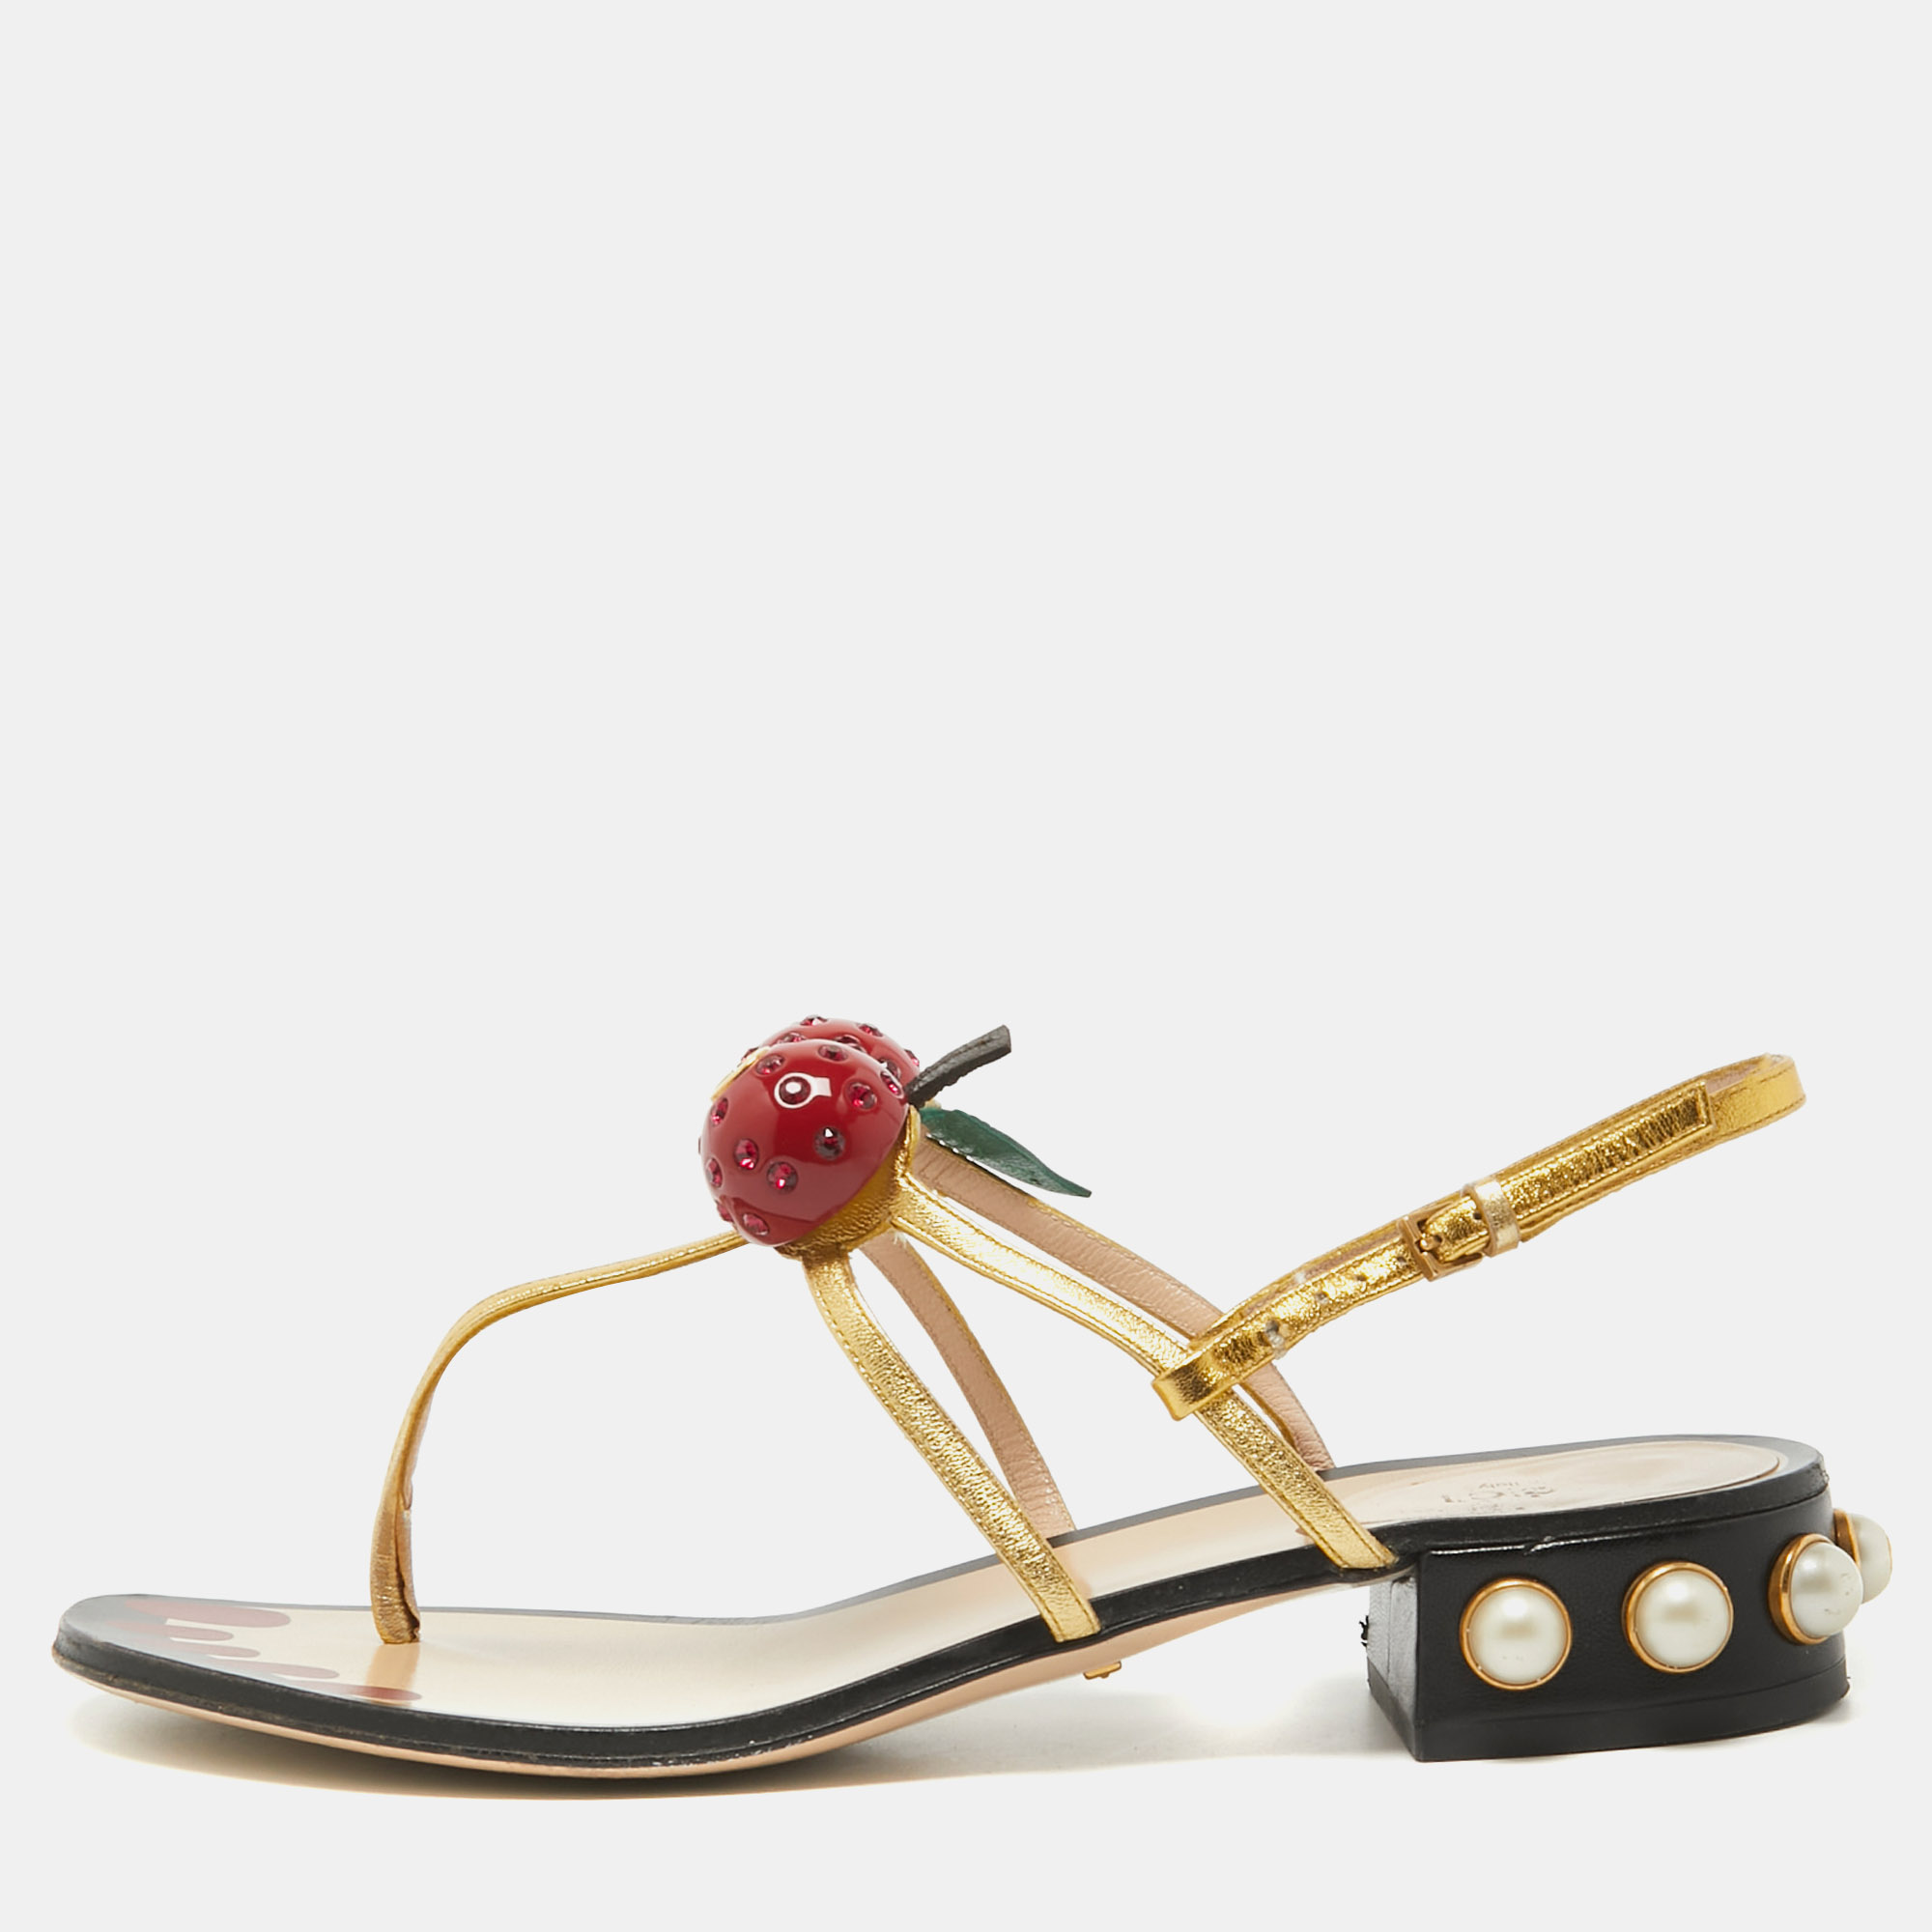 Gucci gold leather hatsumomo cherry thong sandals size 37.5